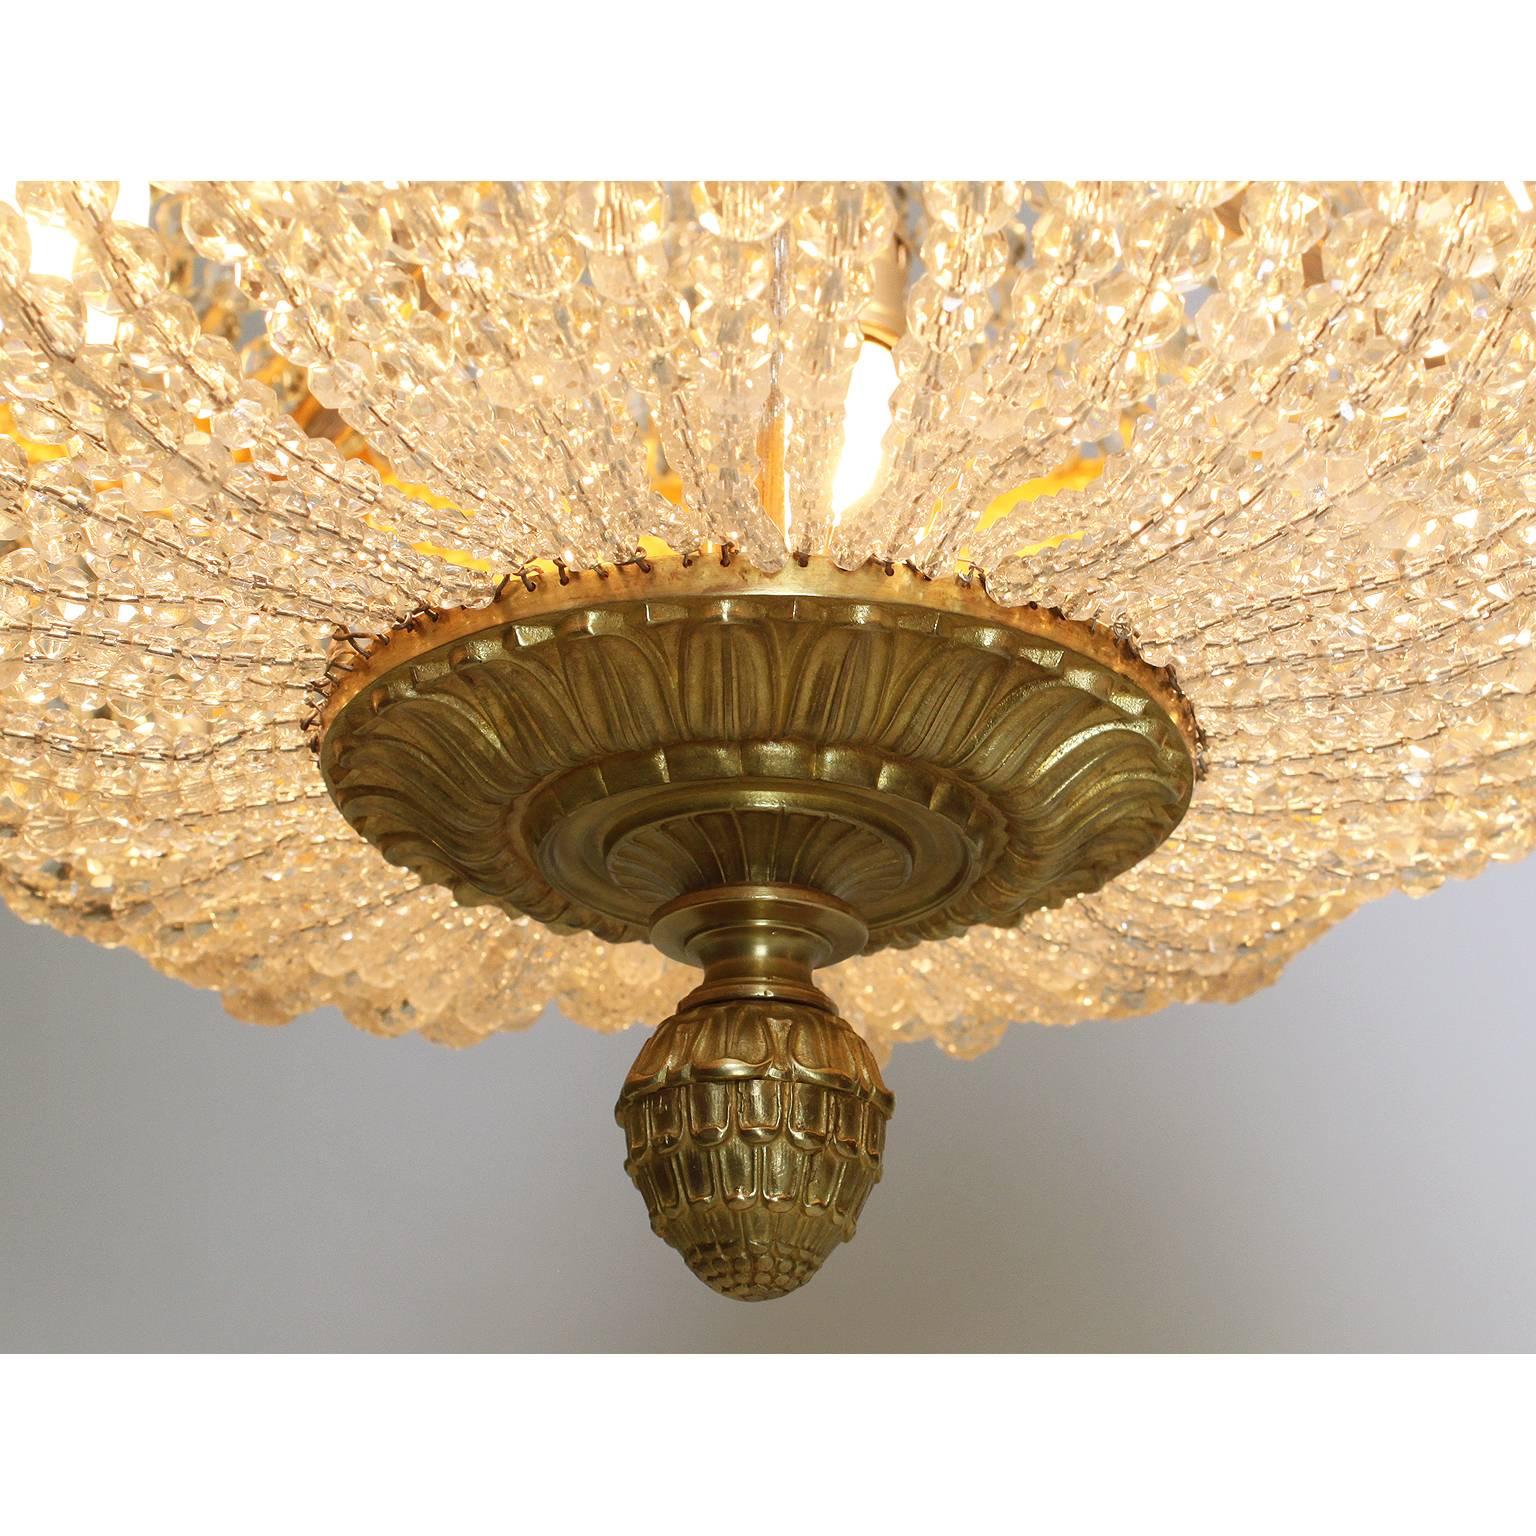 French 19th Century Louis XVI Style Gilt-Bronze and Cut-Glass Chandelier For Sale 1